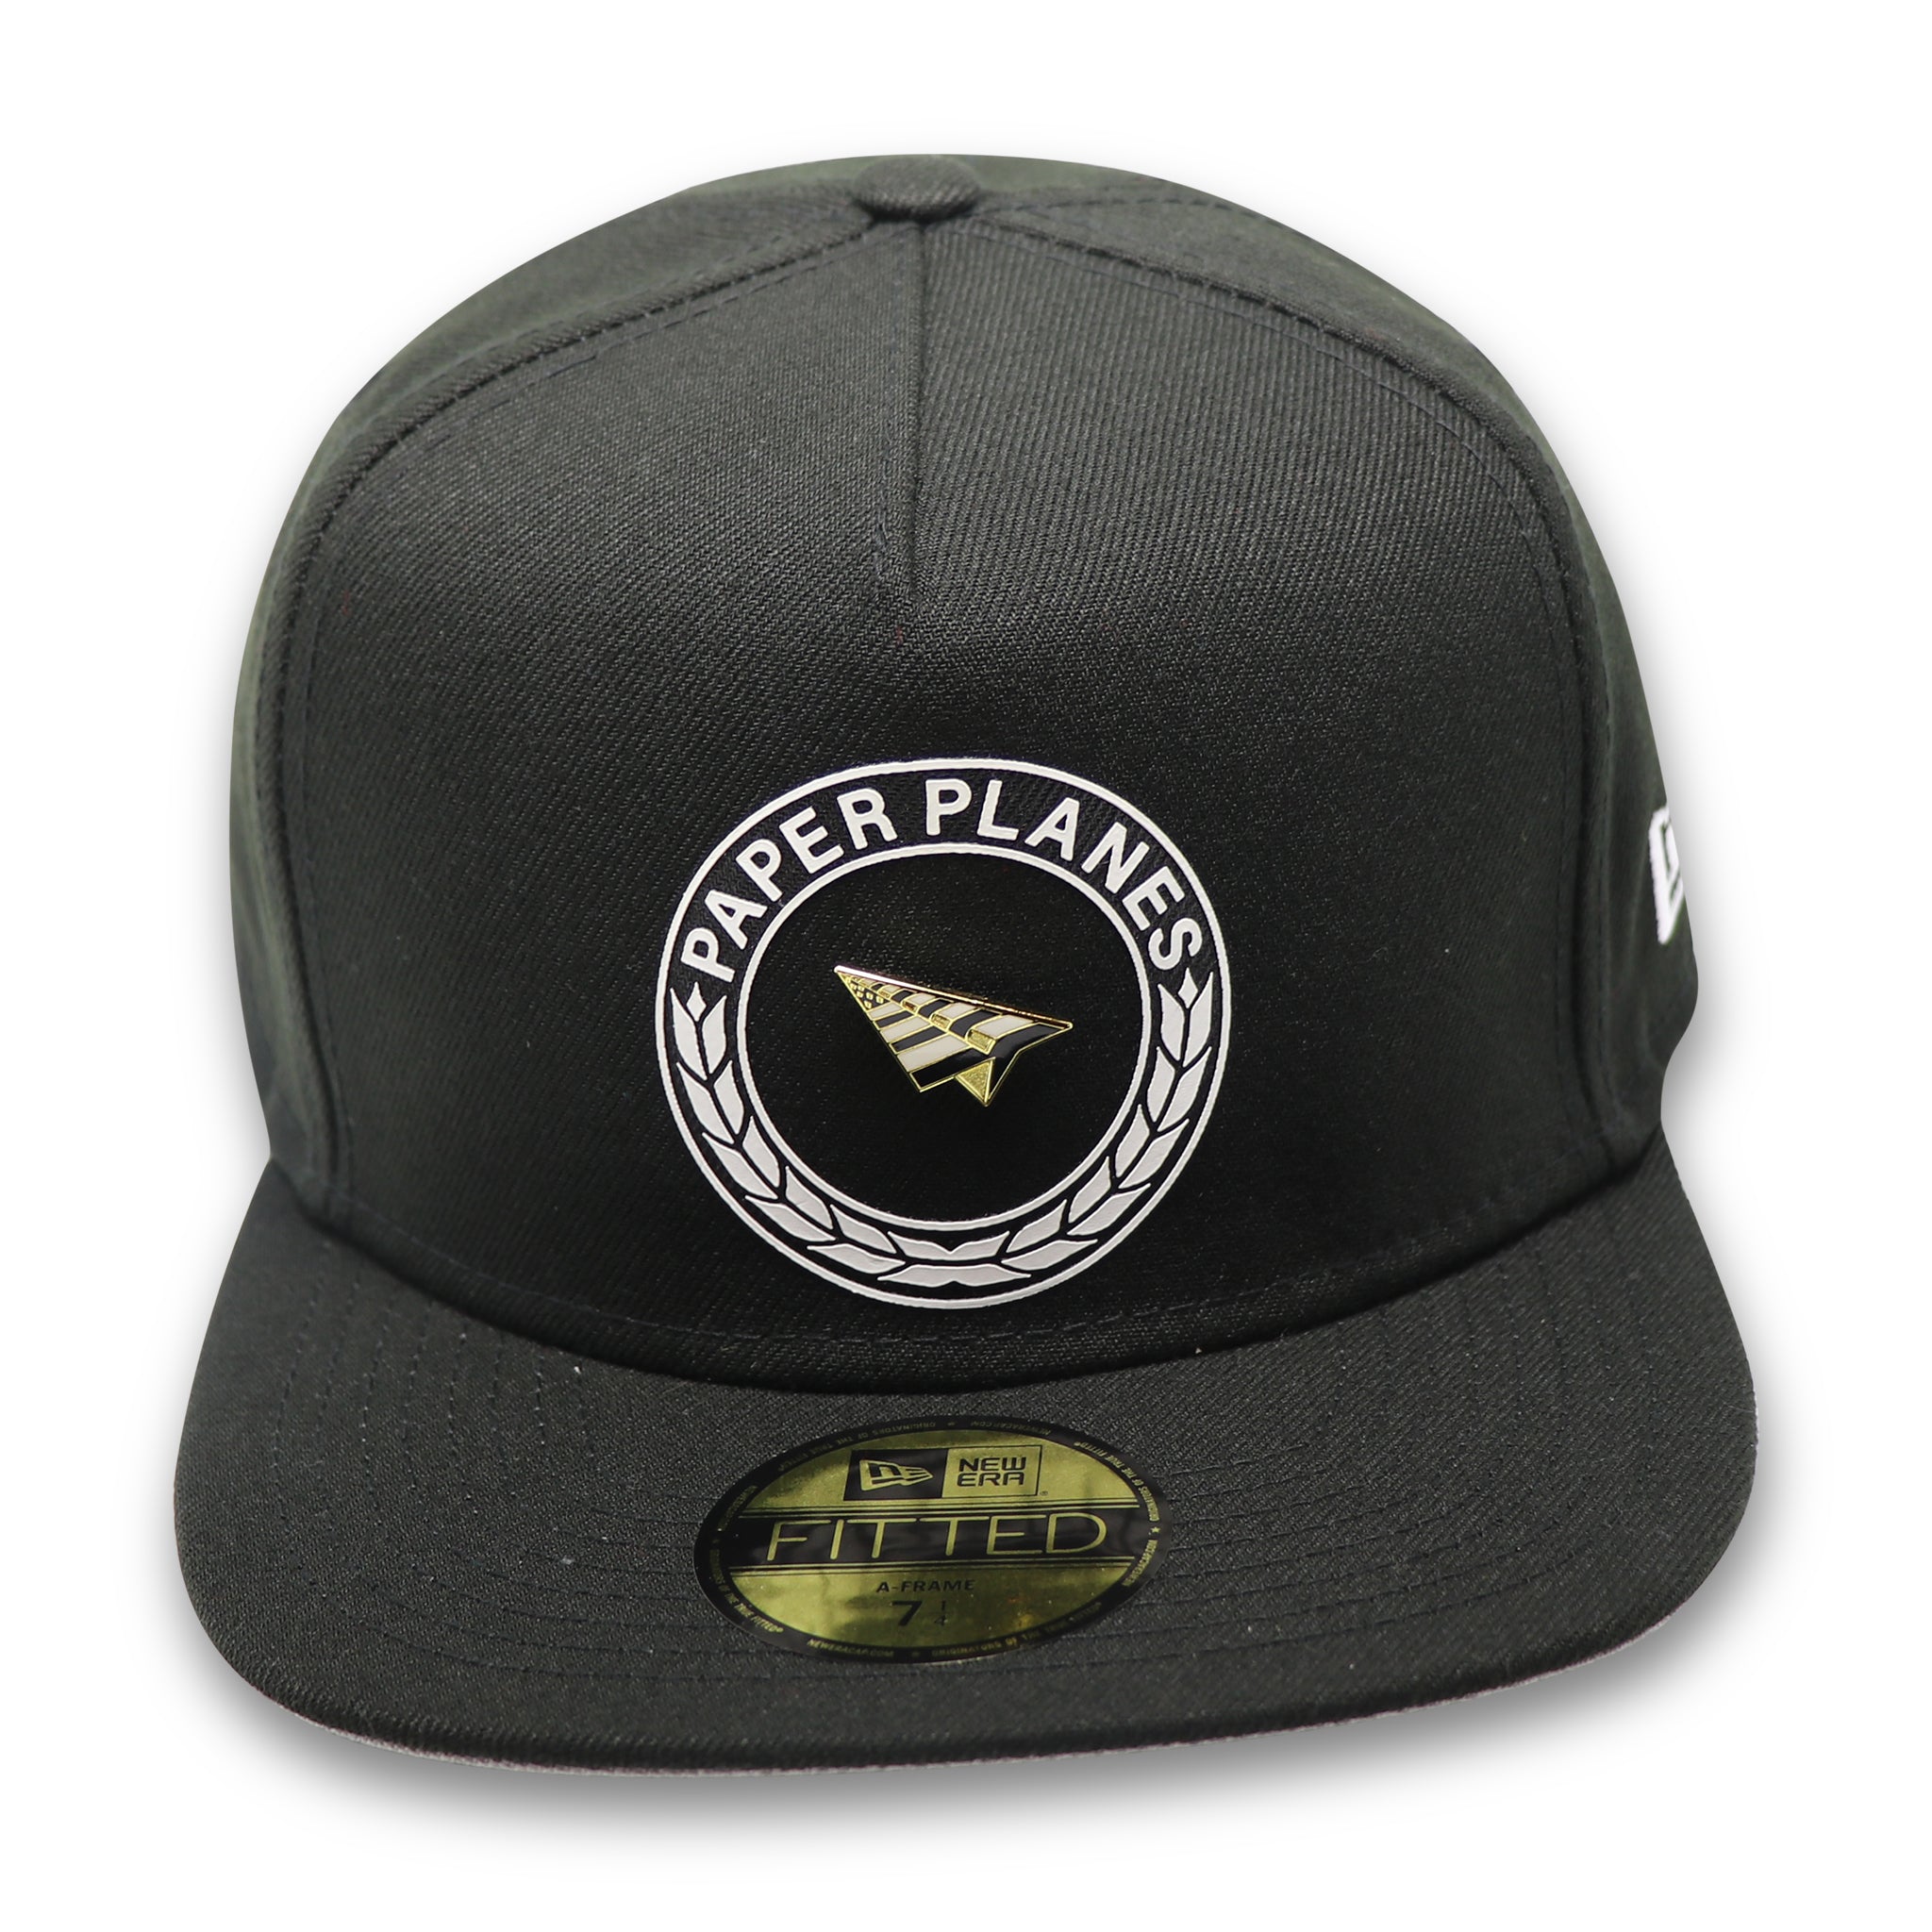 PAPER PLANES FIRST CLASS (BLACK) FITTED